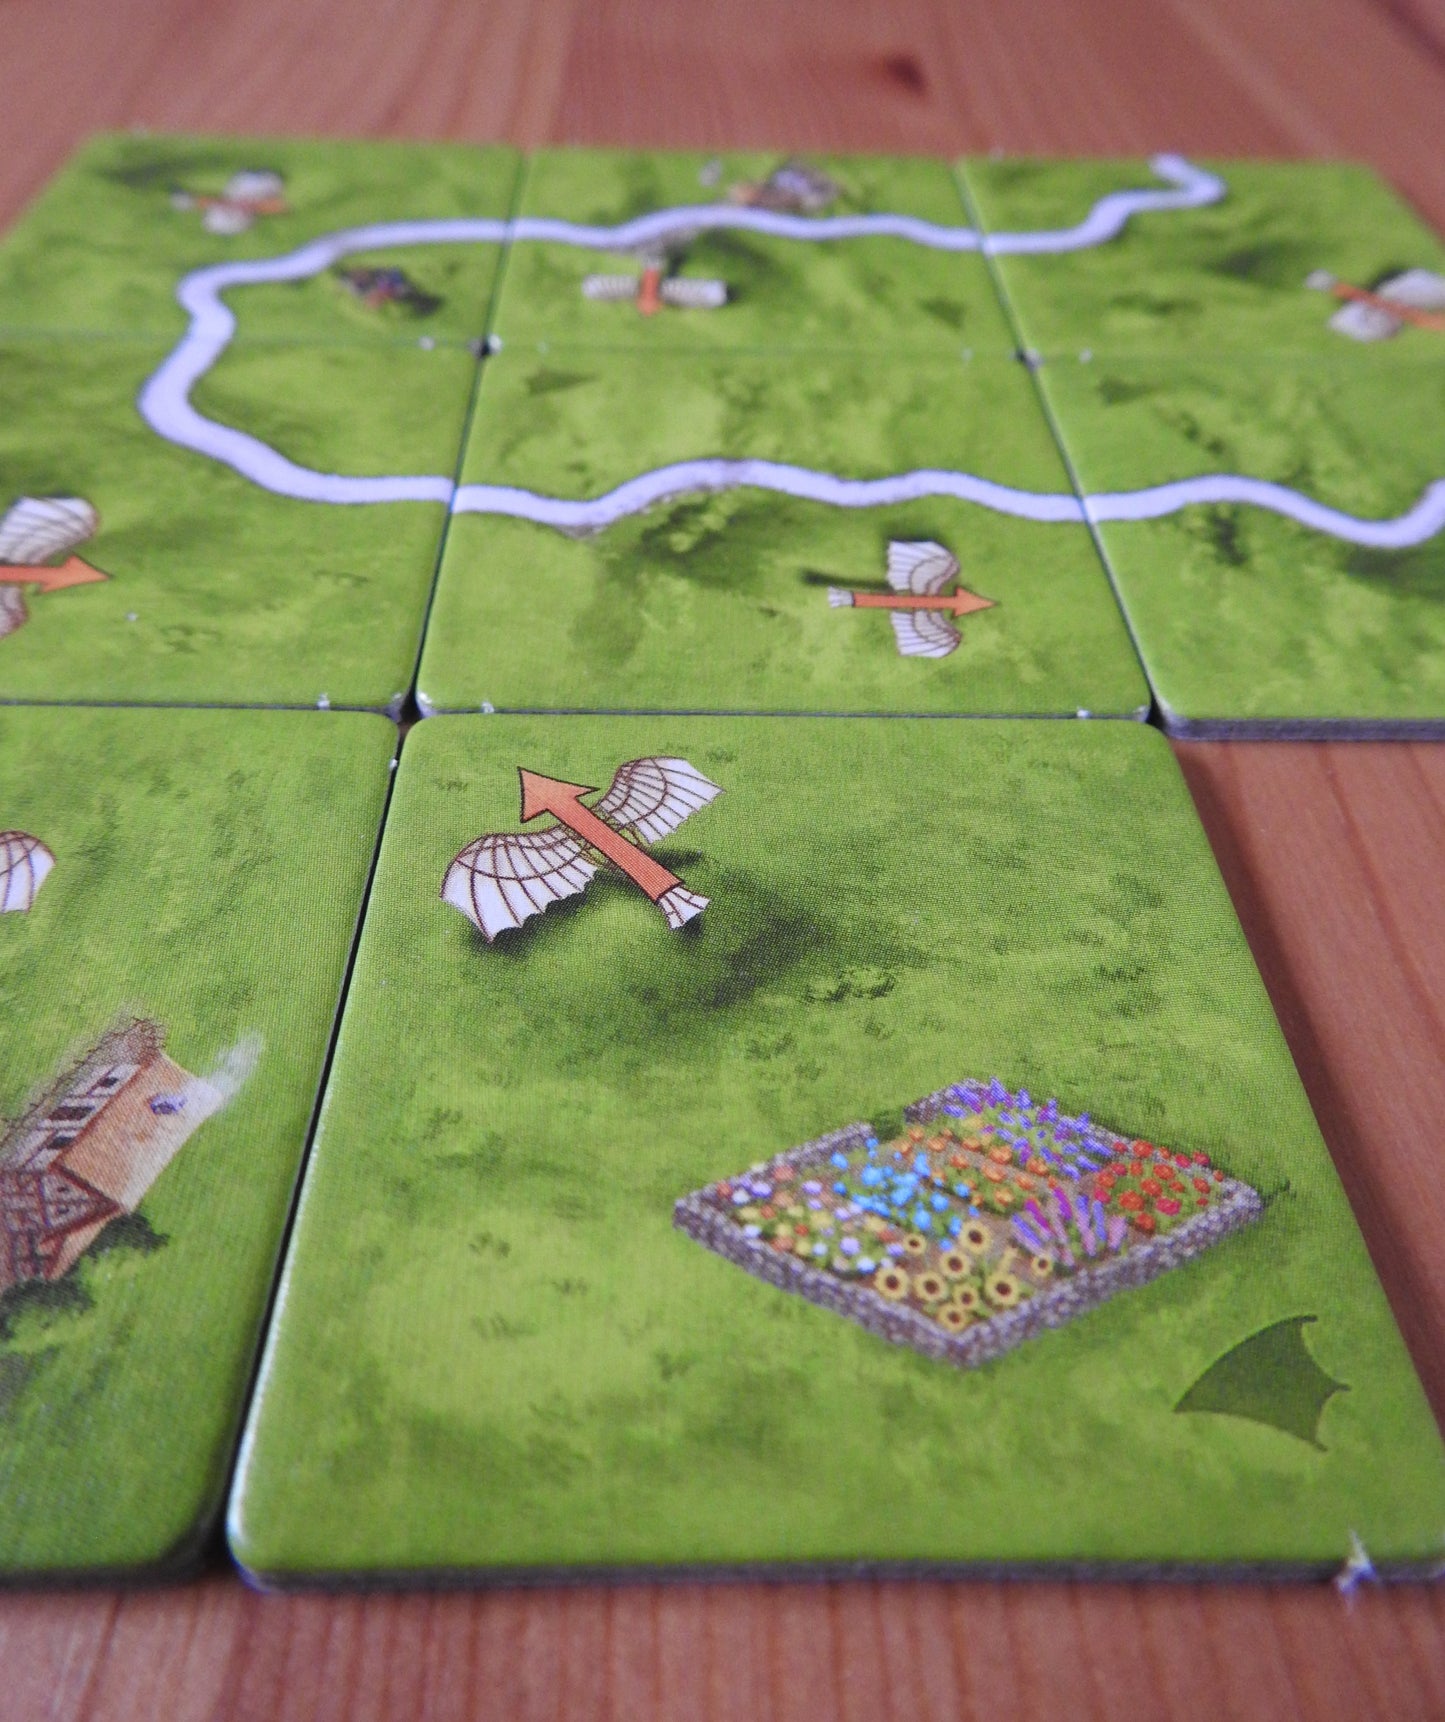 A closer view of the lovely artwork on the tiles in this Carcassonne Flying Machines mini expansion.